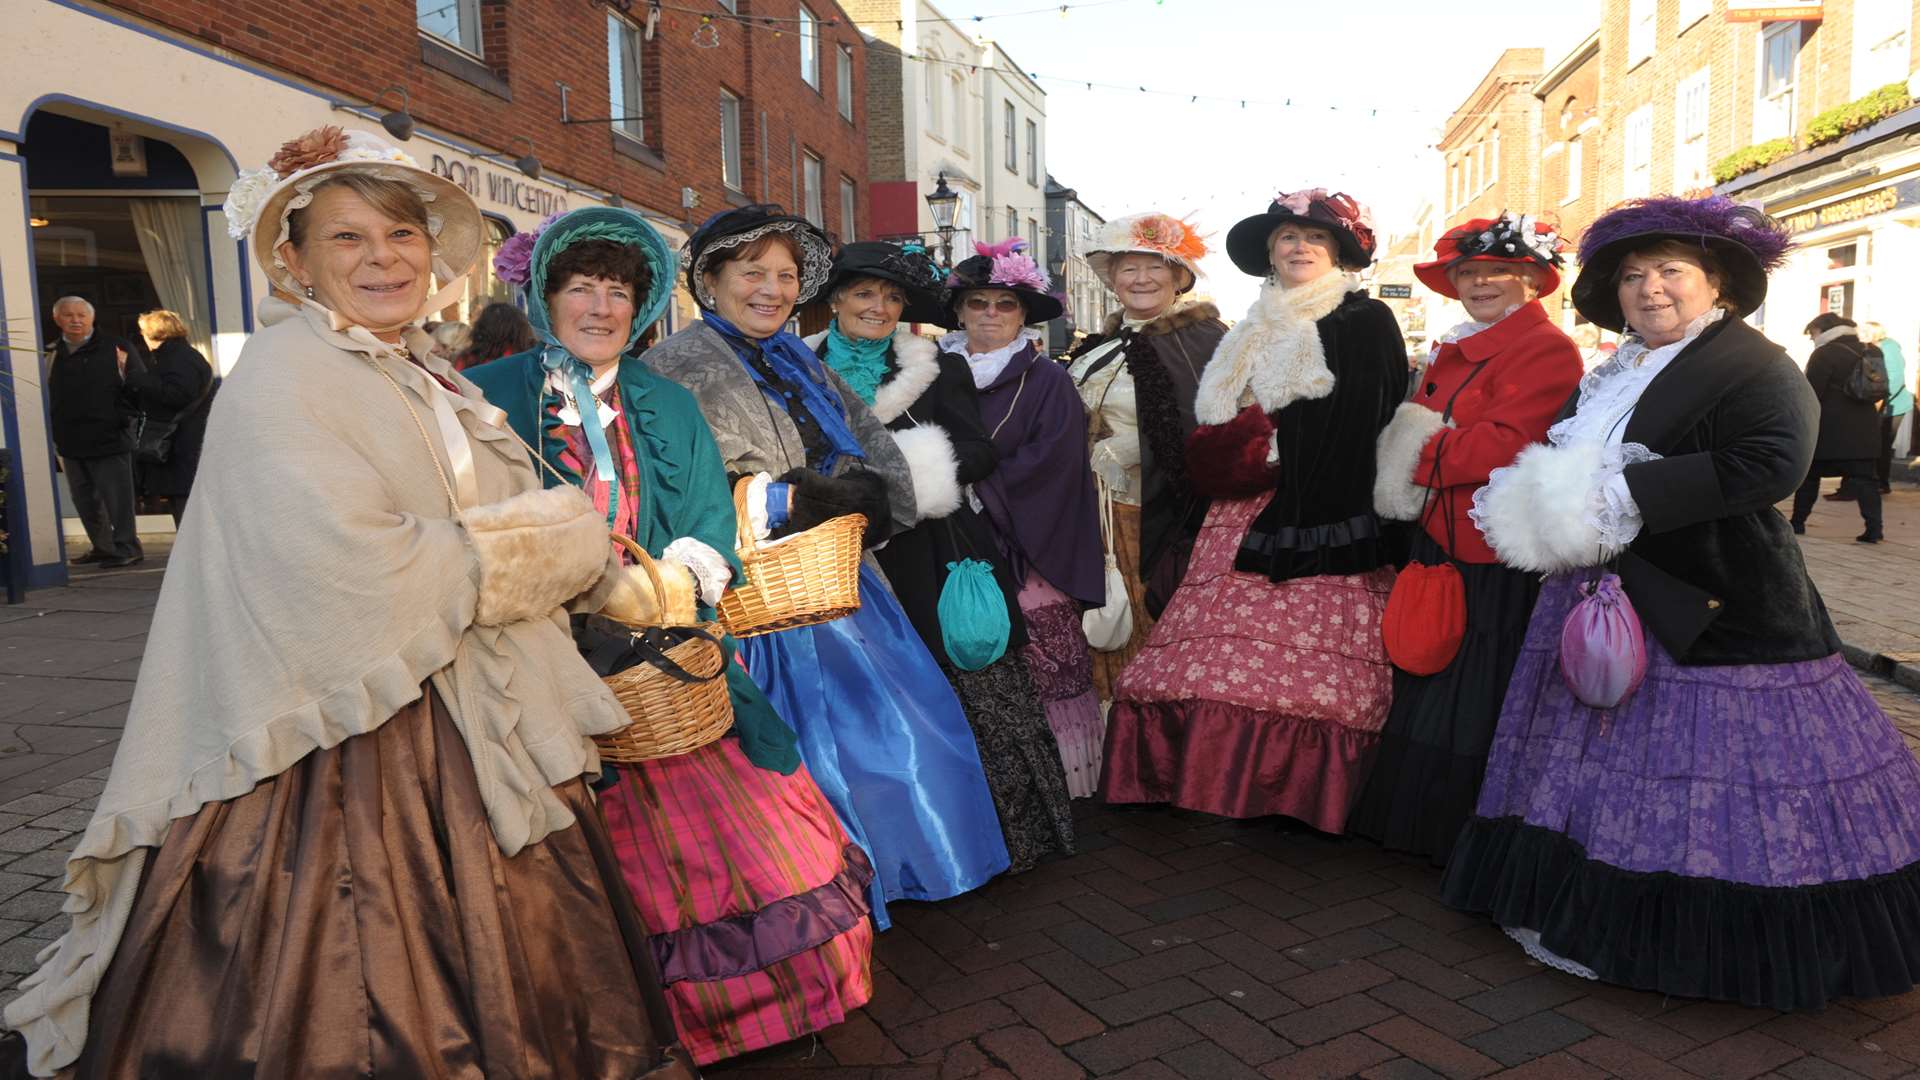 The Dickensian Christmas Festival is a popular family event